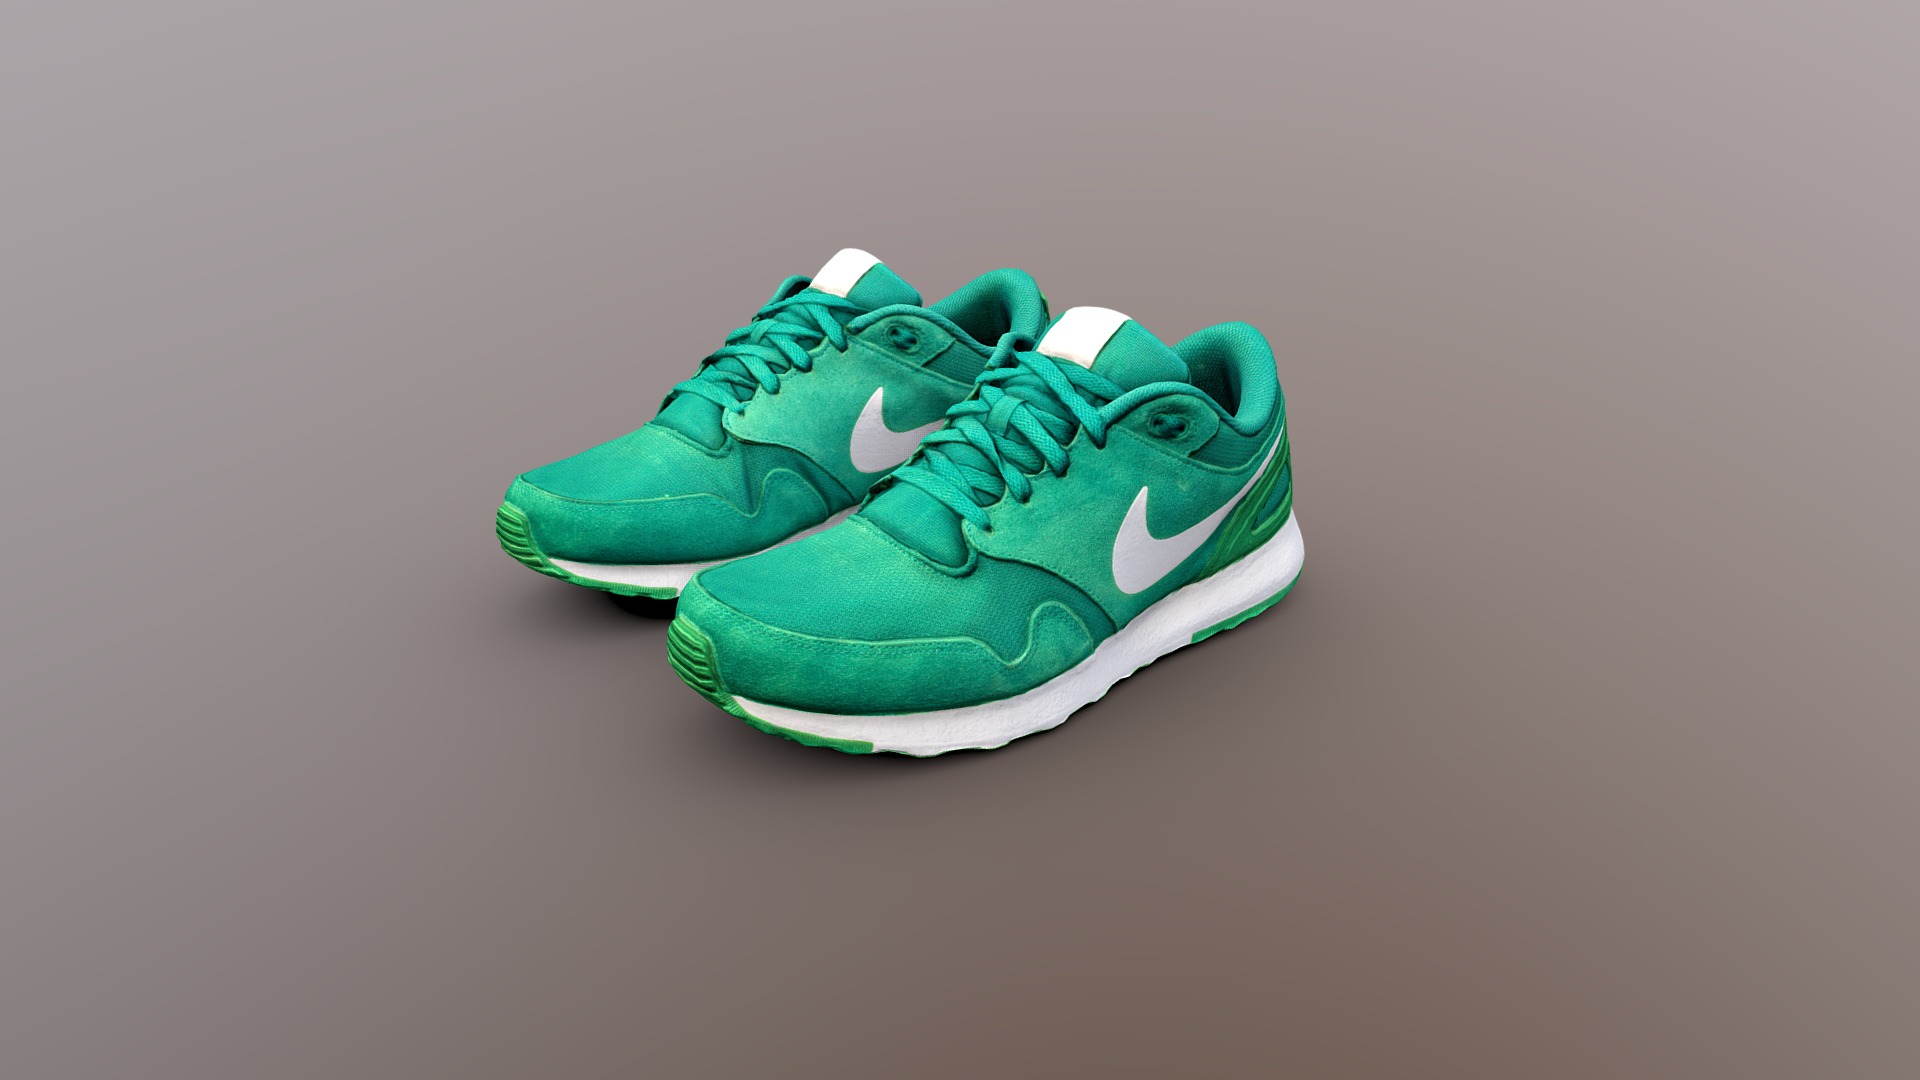 3D model Nike Shoes - This is a 3D model of the Nike Shoes. The 3D model is about a pair of green shoes.